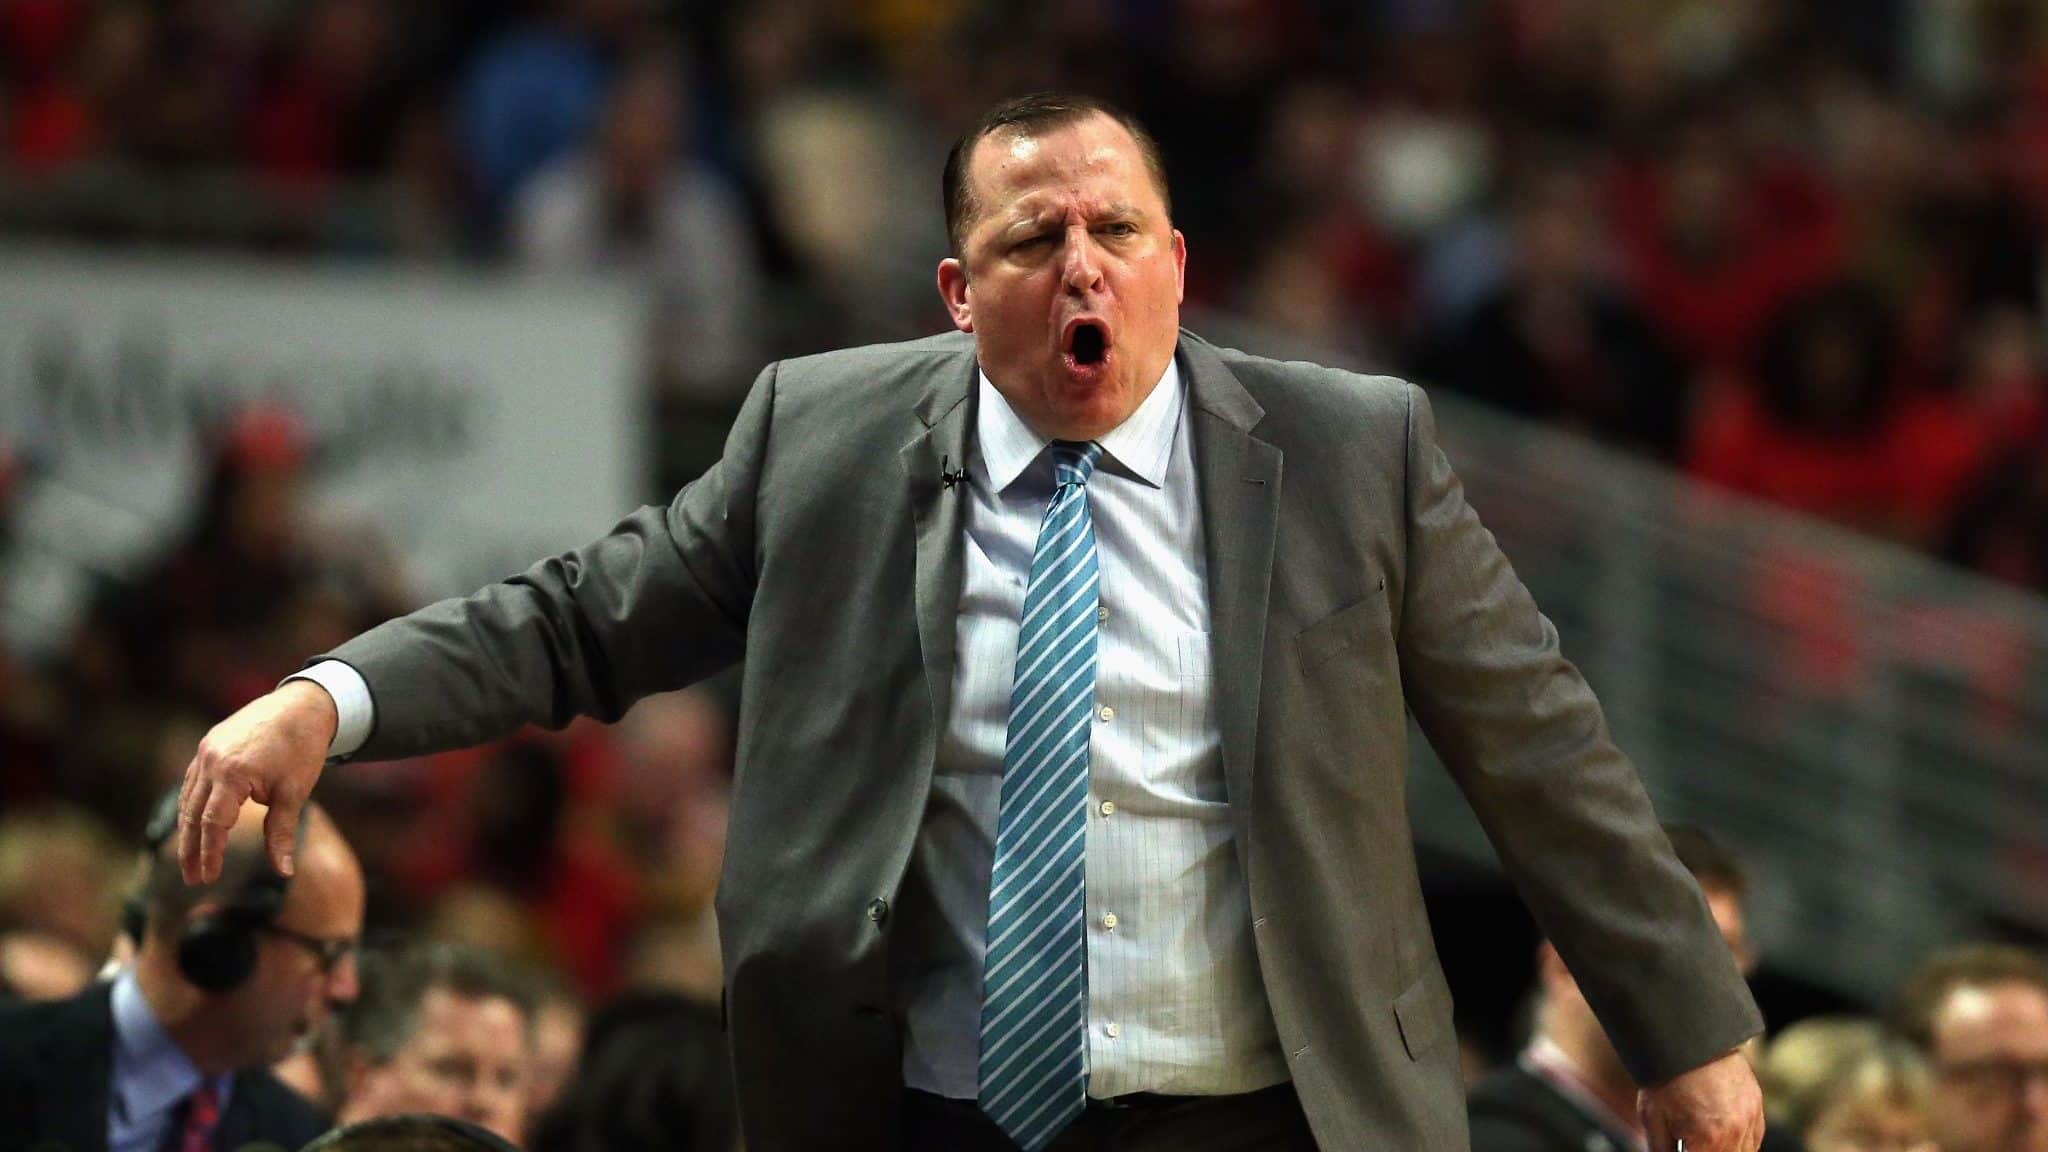 CHICAGO, IL - MAY 10: Head coach Tom Thibodeau of the Chicago Bulls yells at a referee against the Cleveland Cavaliers in Game Four of the Eastern Conference Semifinals of the 2015 NBA Playoffs at the United Center on May 10, 2015 in Chicago, Illinois. NOTE TO USER: User expressly acknowledges and agress that, by downloading and or using the photograph, User is consenting to the terms and conditions of the Getty Images License Agreement.